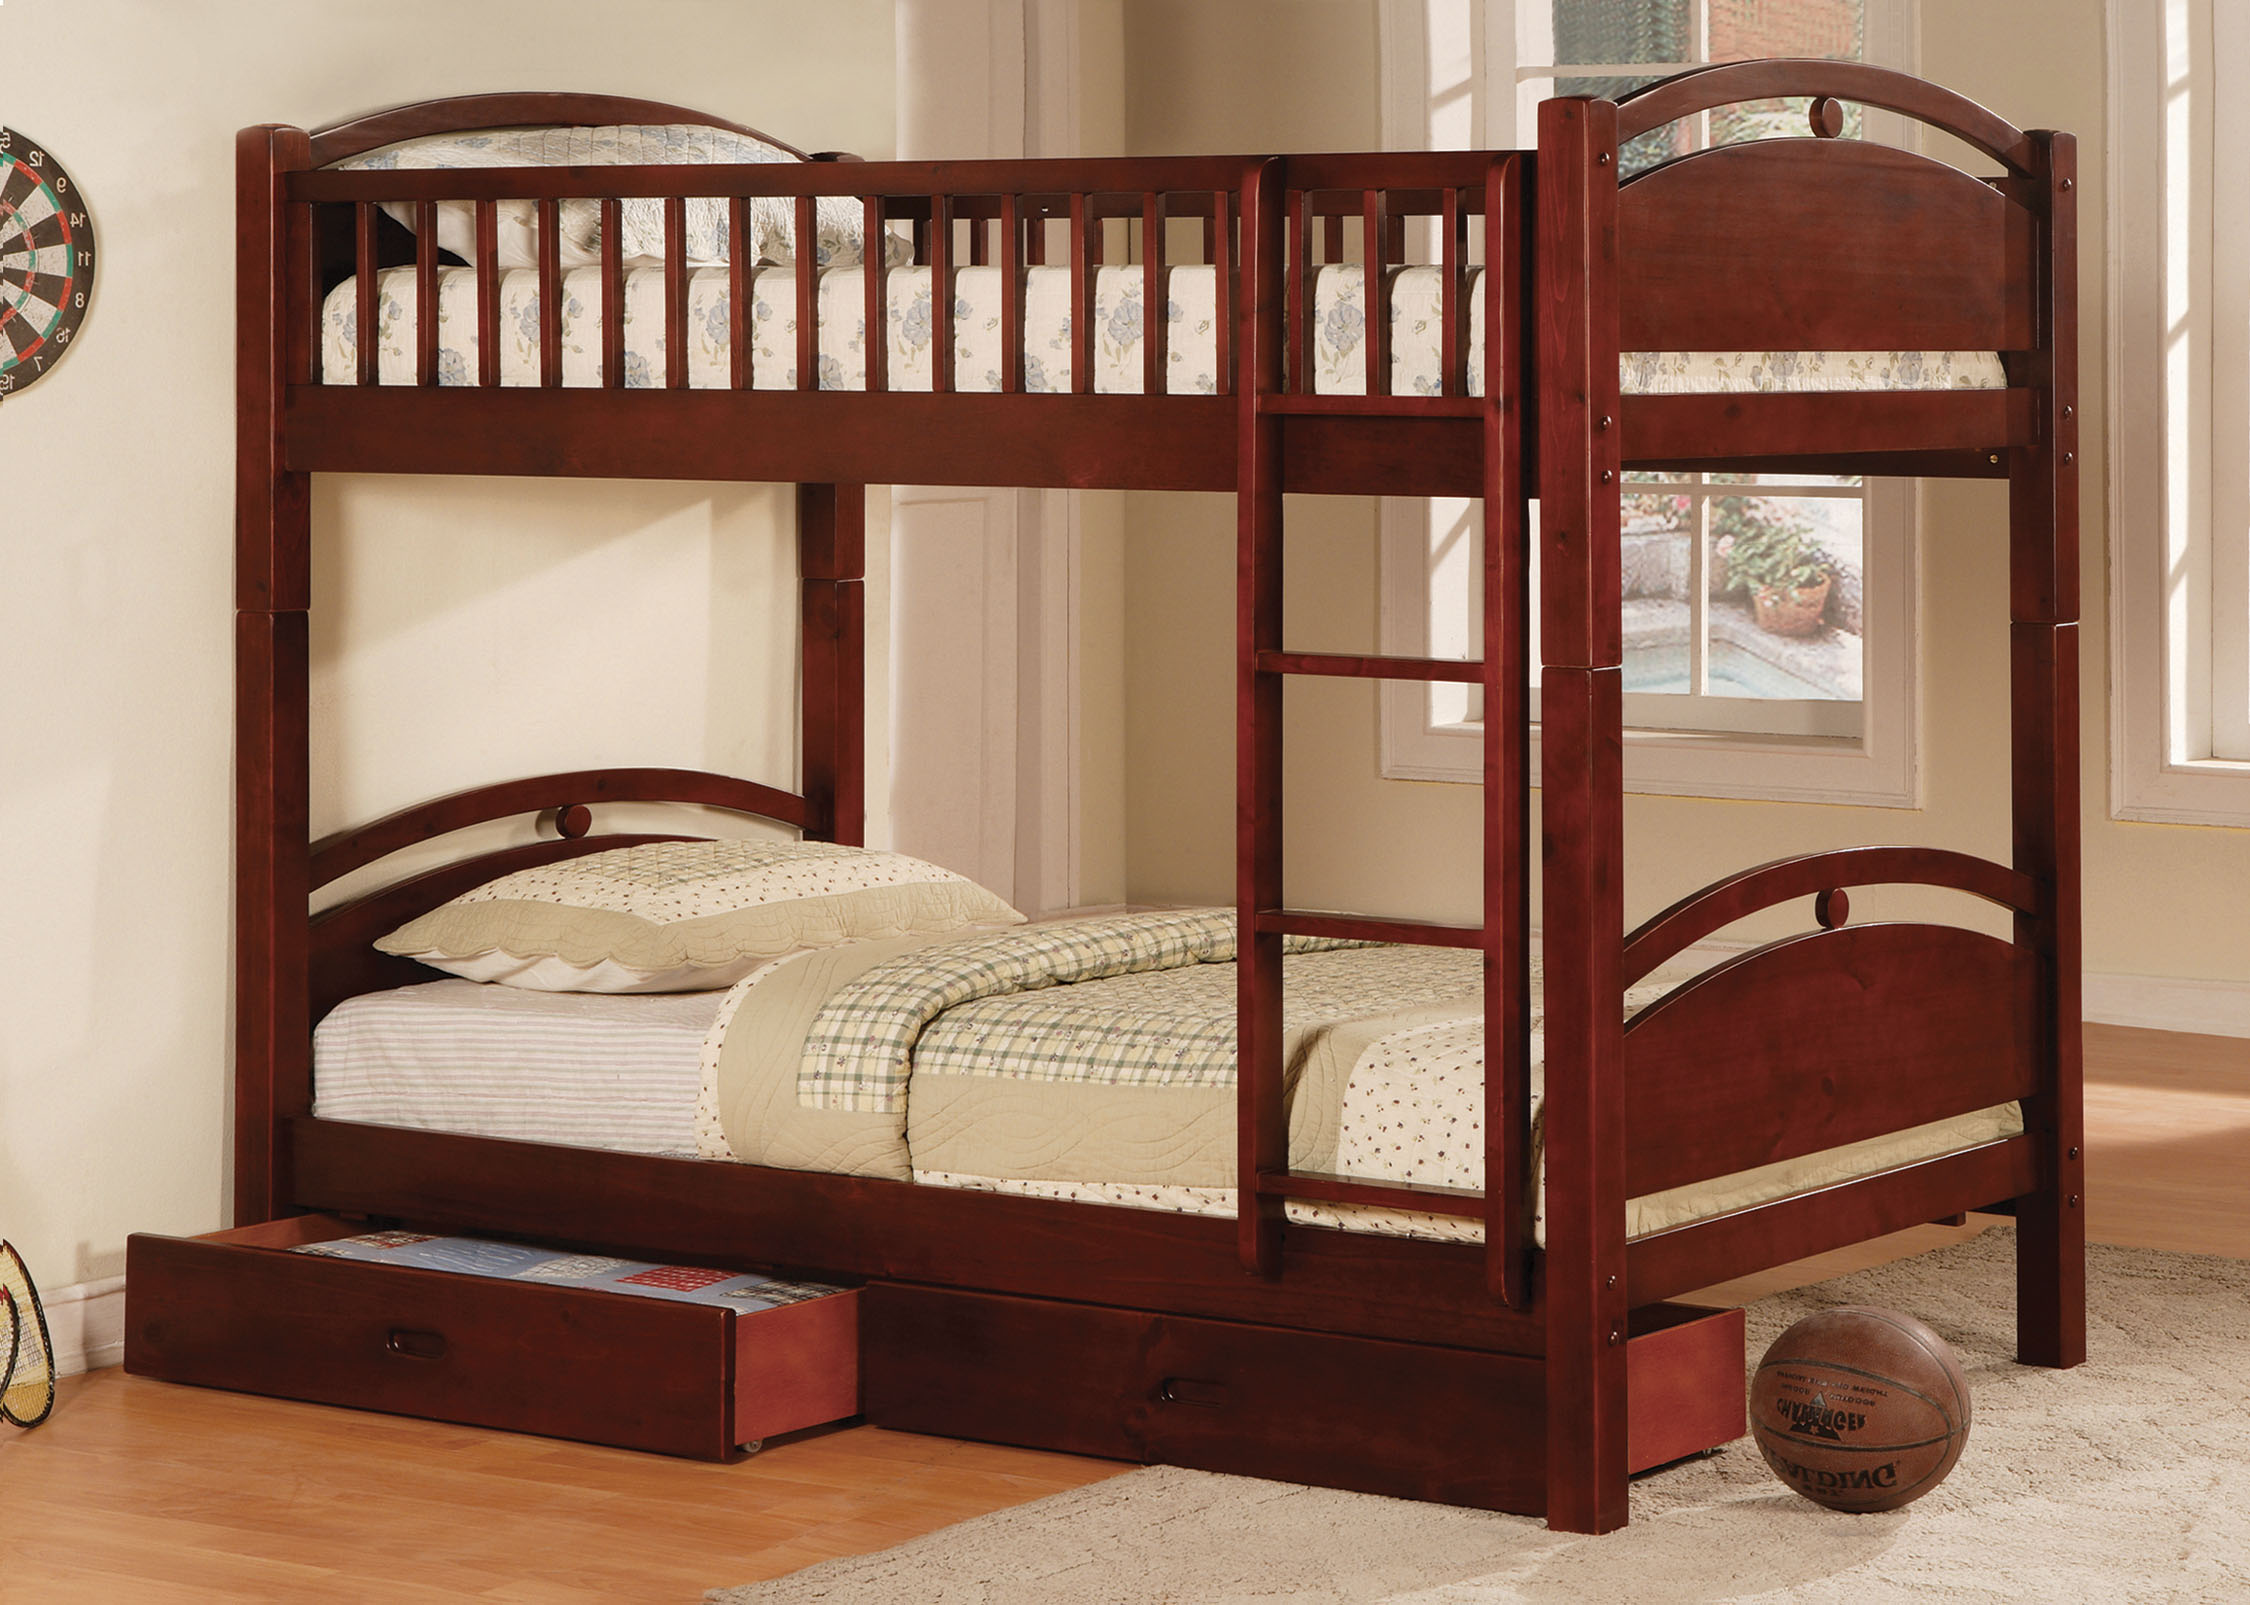 Furniture of America Antrim Twin over Twin Bunk Bed with Drawers